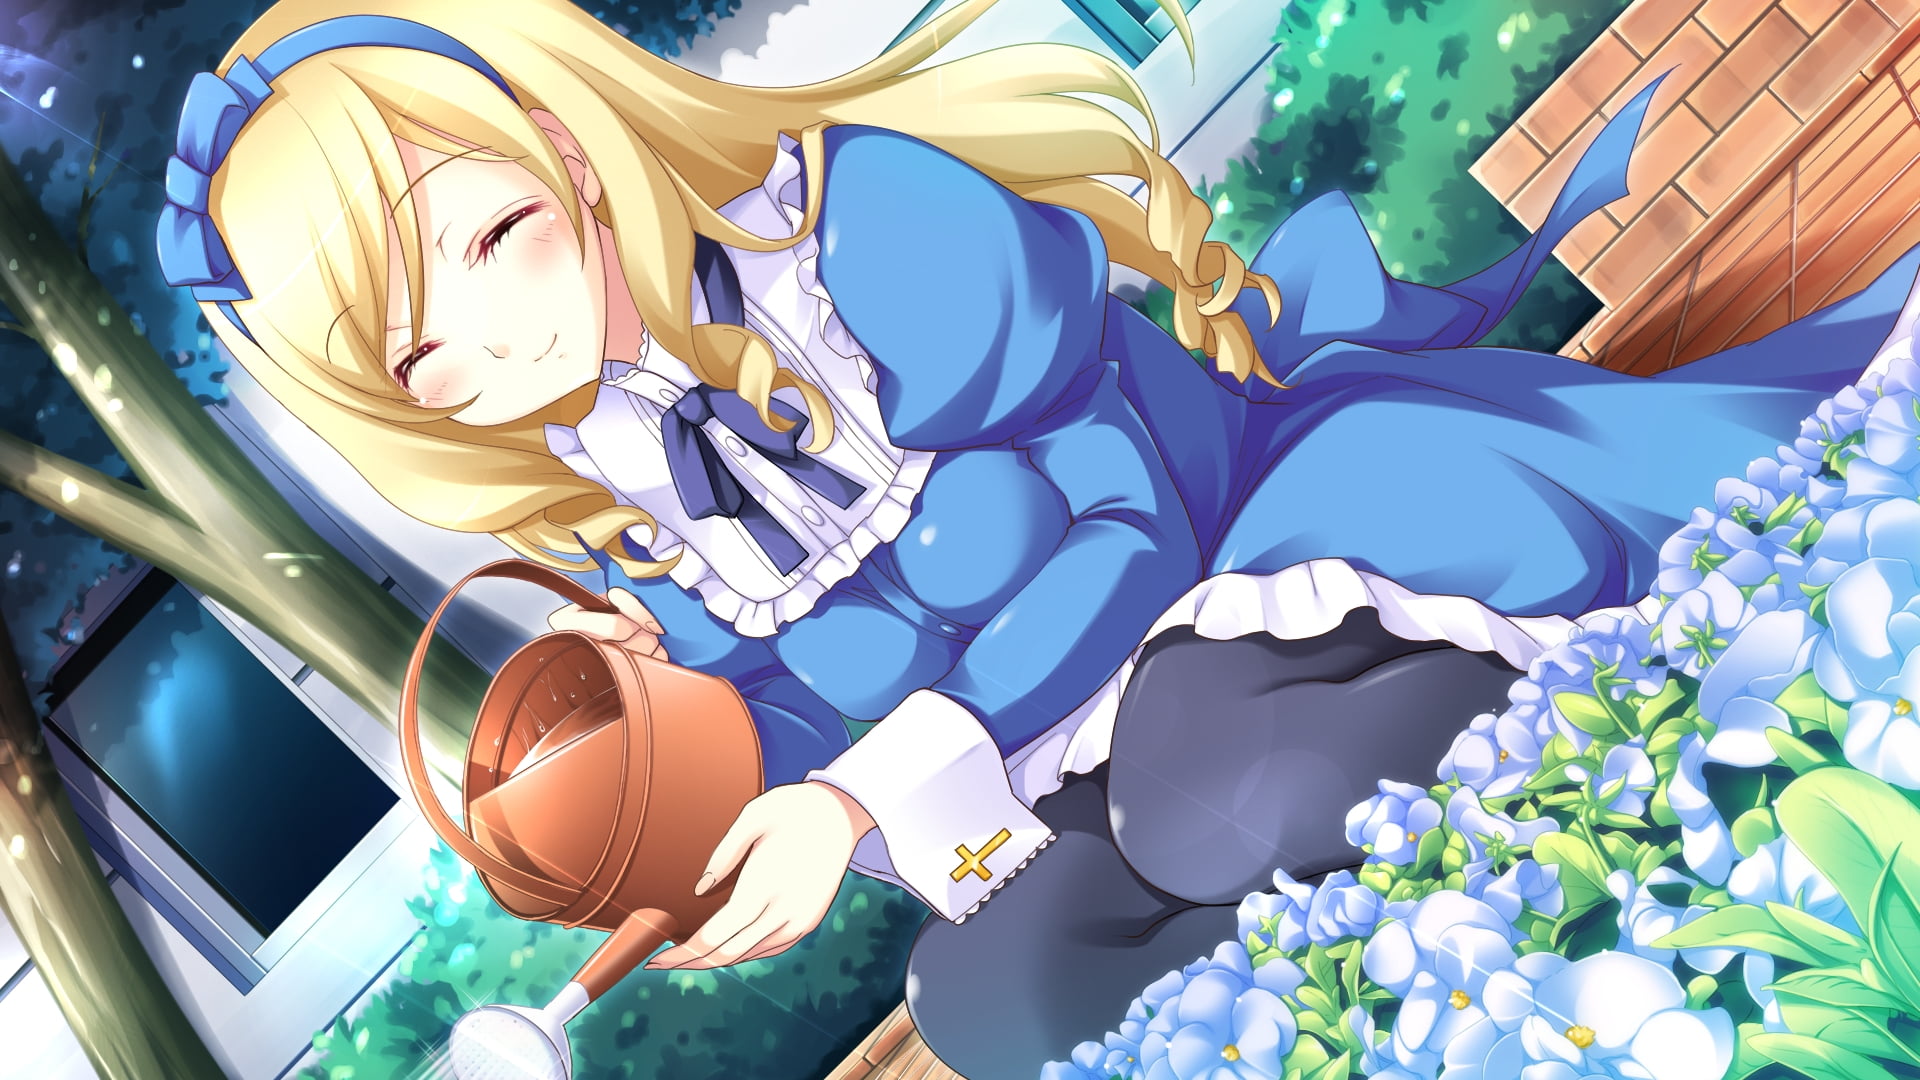 Online crop | female anime character wears blue and white long-sleeved